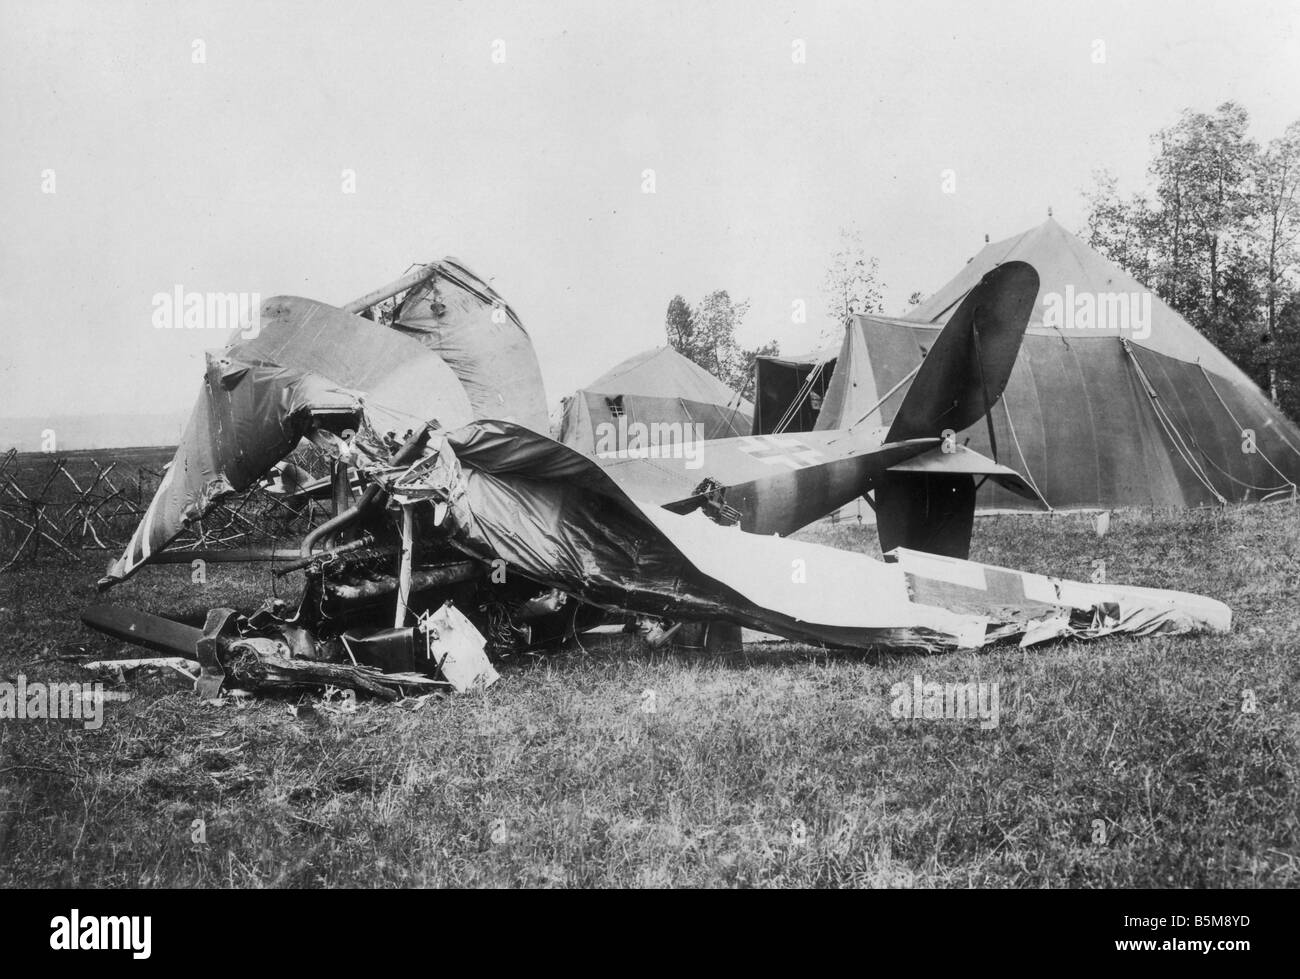 2 G55 L2 1918 5 Aircraft wreckage WWI 1918 History World War I Aerial warfare The wreckage of a German aircraft at the Western F Stock Photo